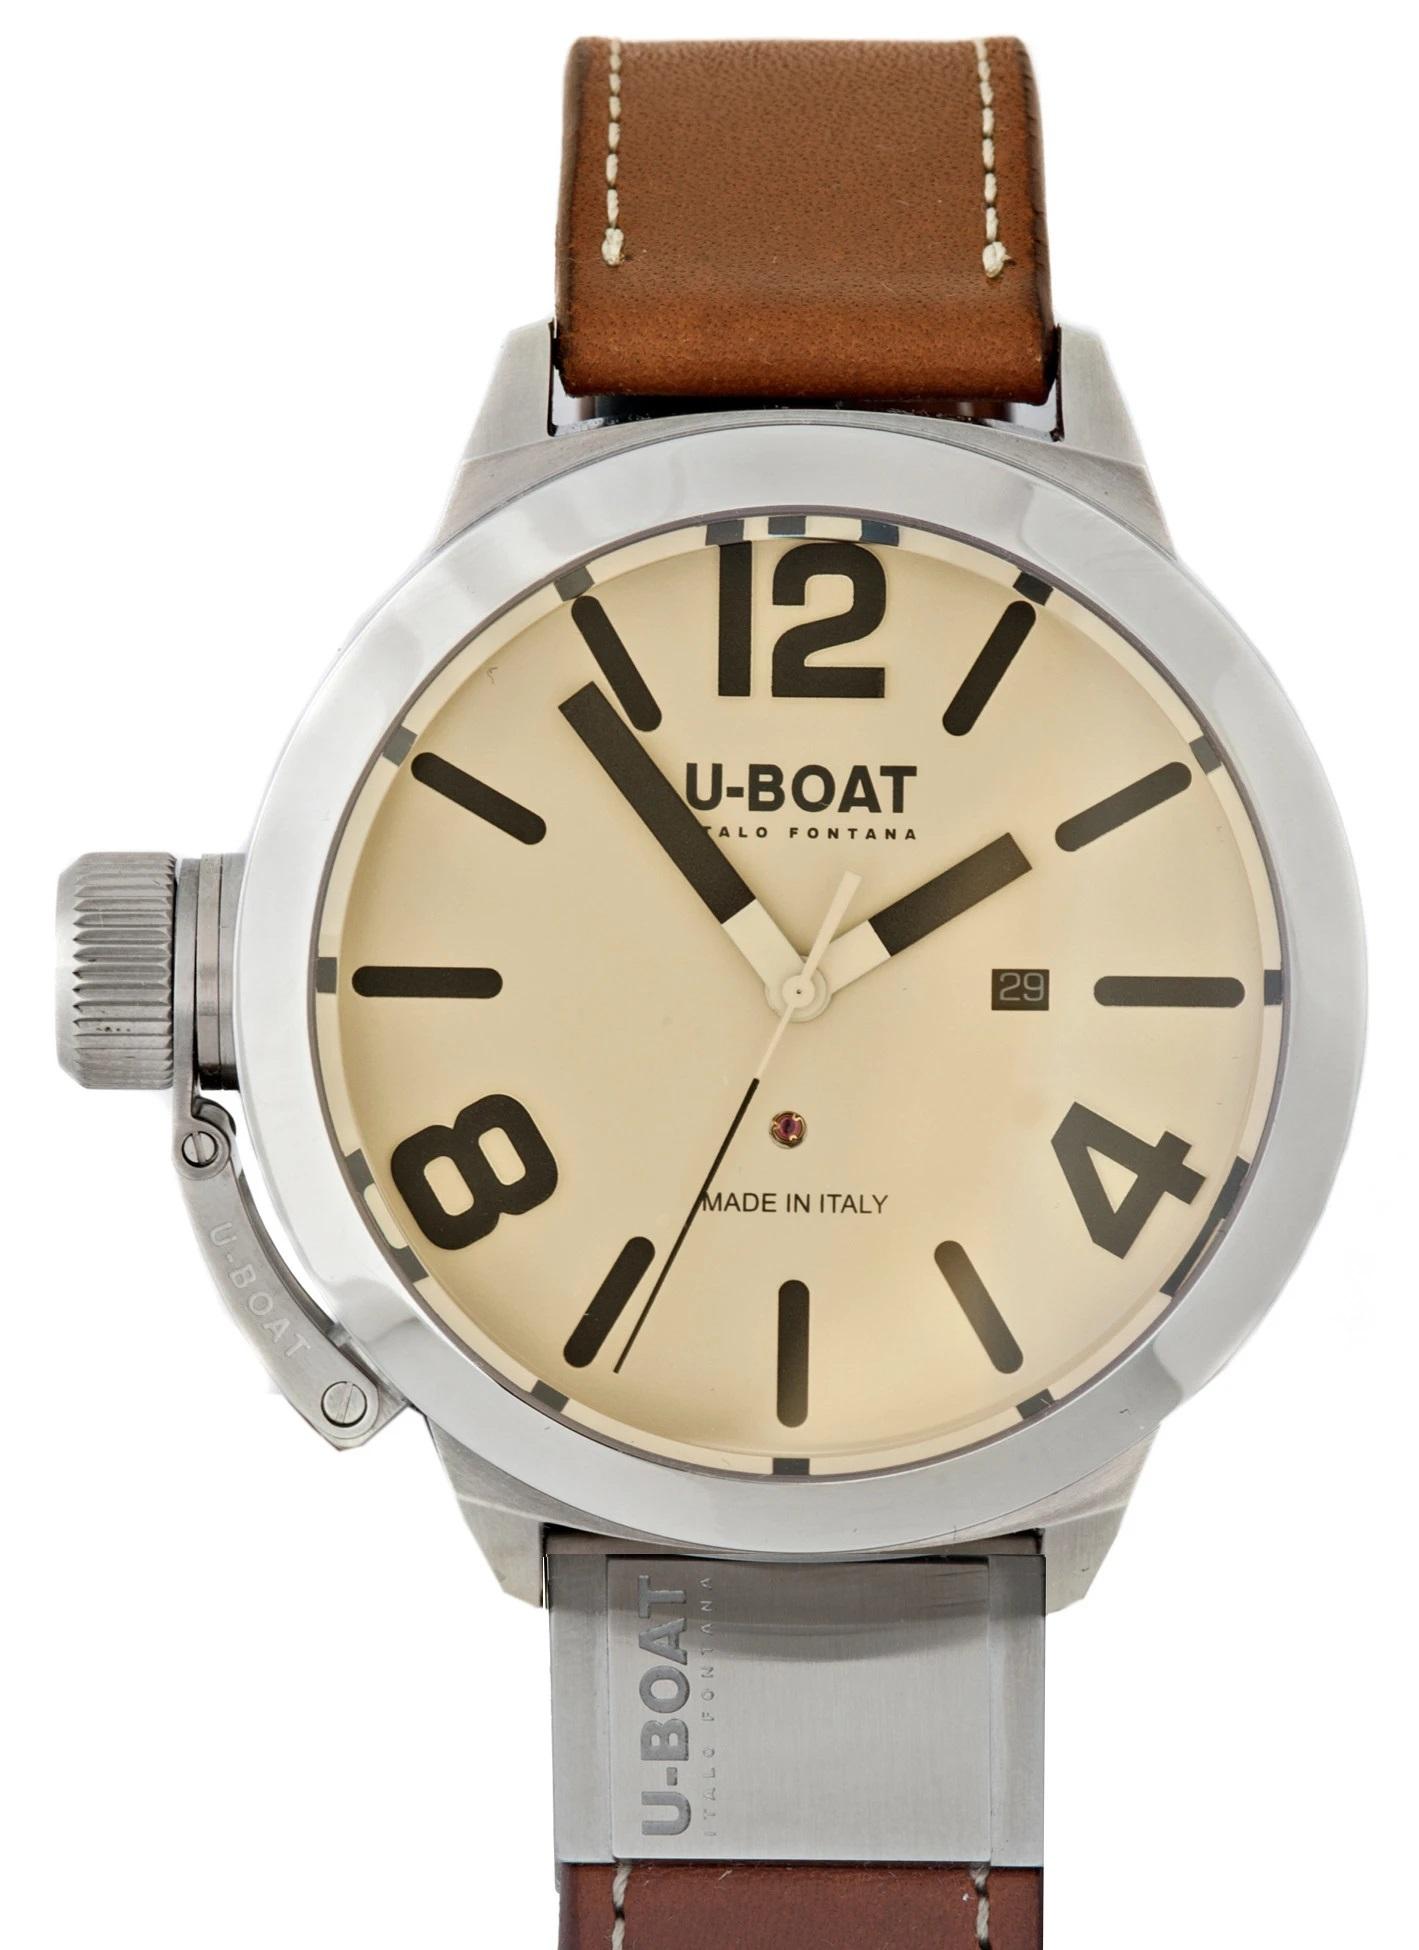 U-BOATClassico Tungsteno Automatic Beige Dial Men's Watch 8091
Silver-tone stainless steel case with a brown leather strap. Fixed silver-tone tungsten bezel. Beige dial with black hands and Arabic numeral and index hour markers. Dial Type: Analog.